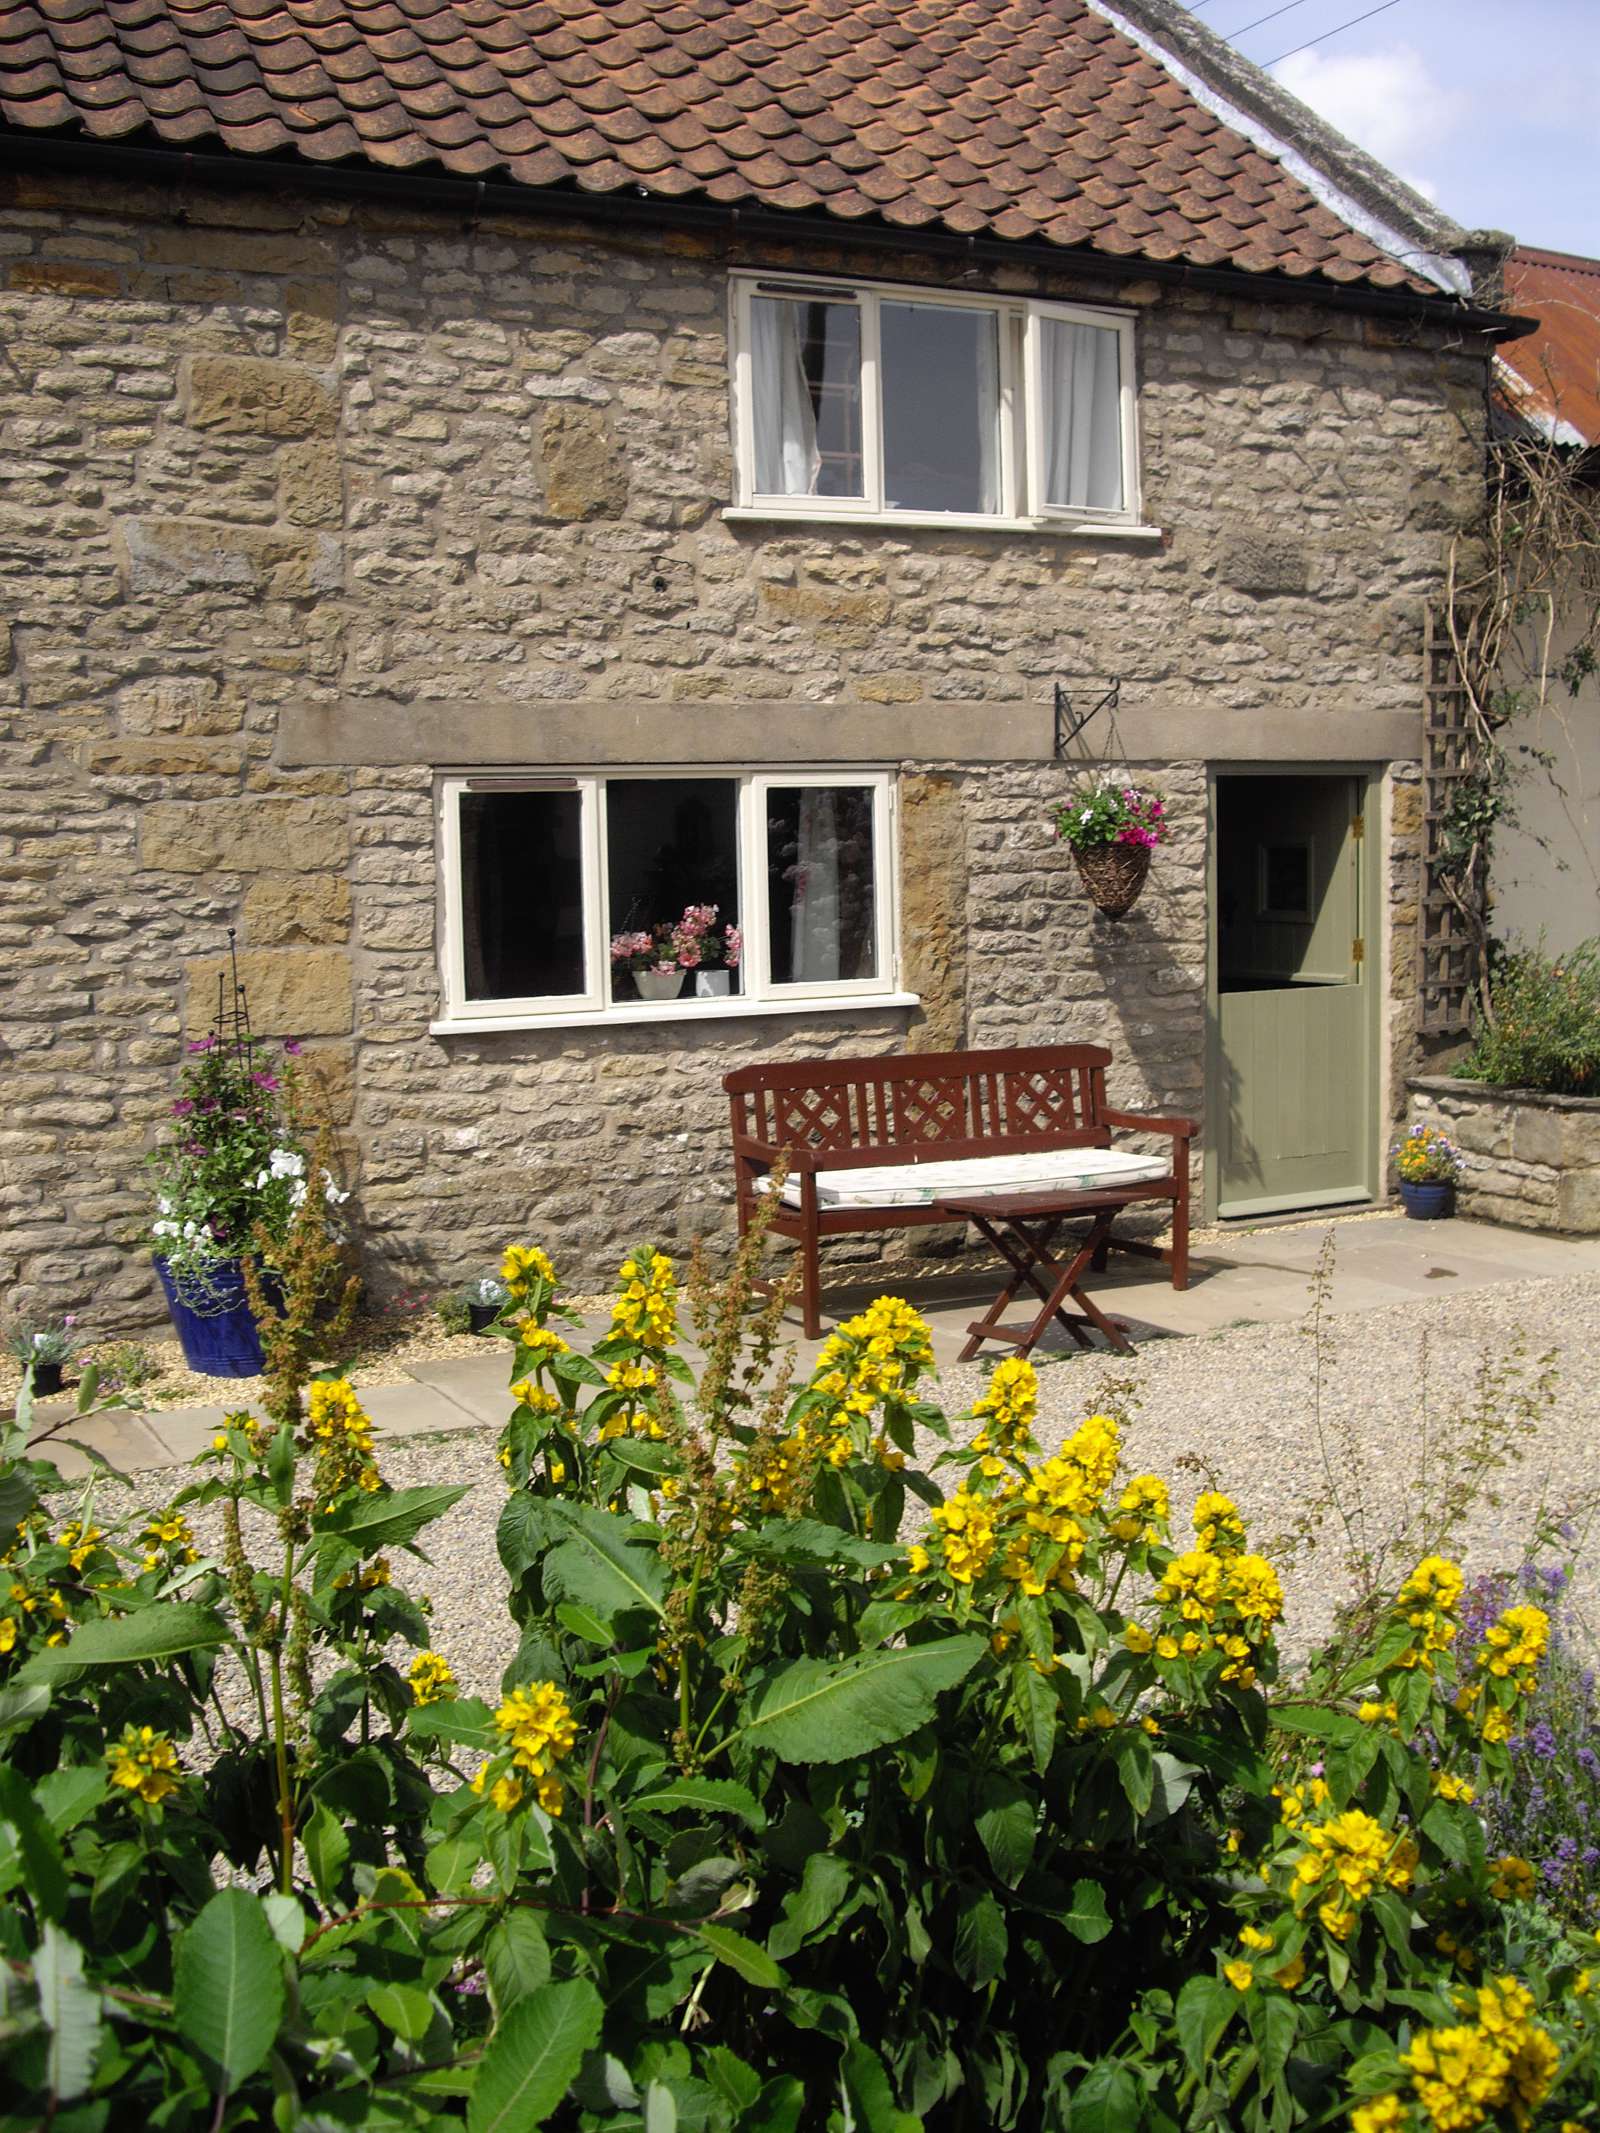 2 Bedroom Sleeps 3 Holiday Cottage Pickering No Booking Fees